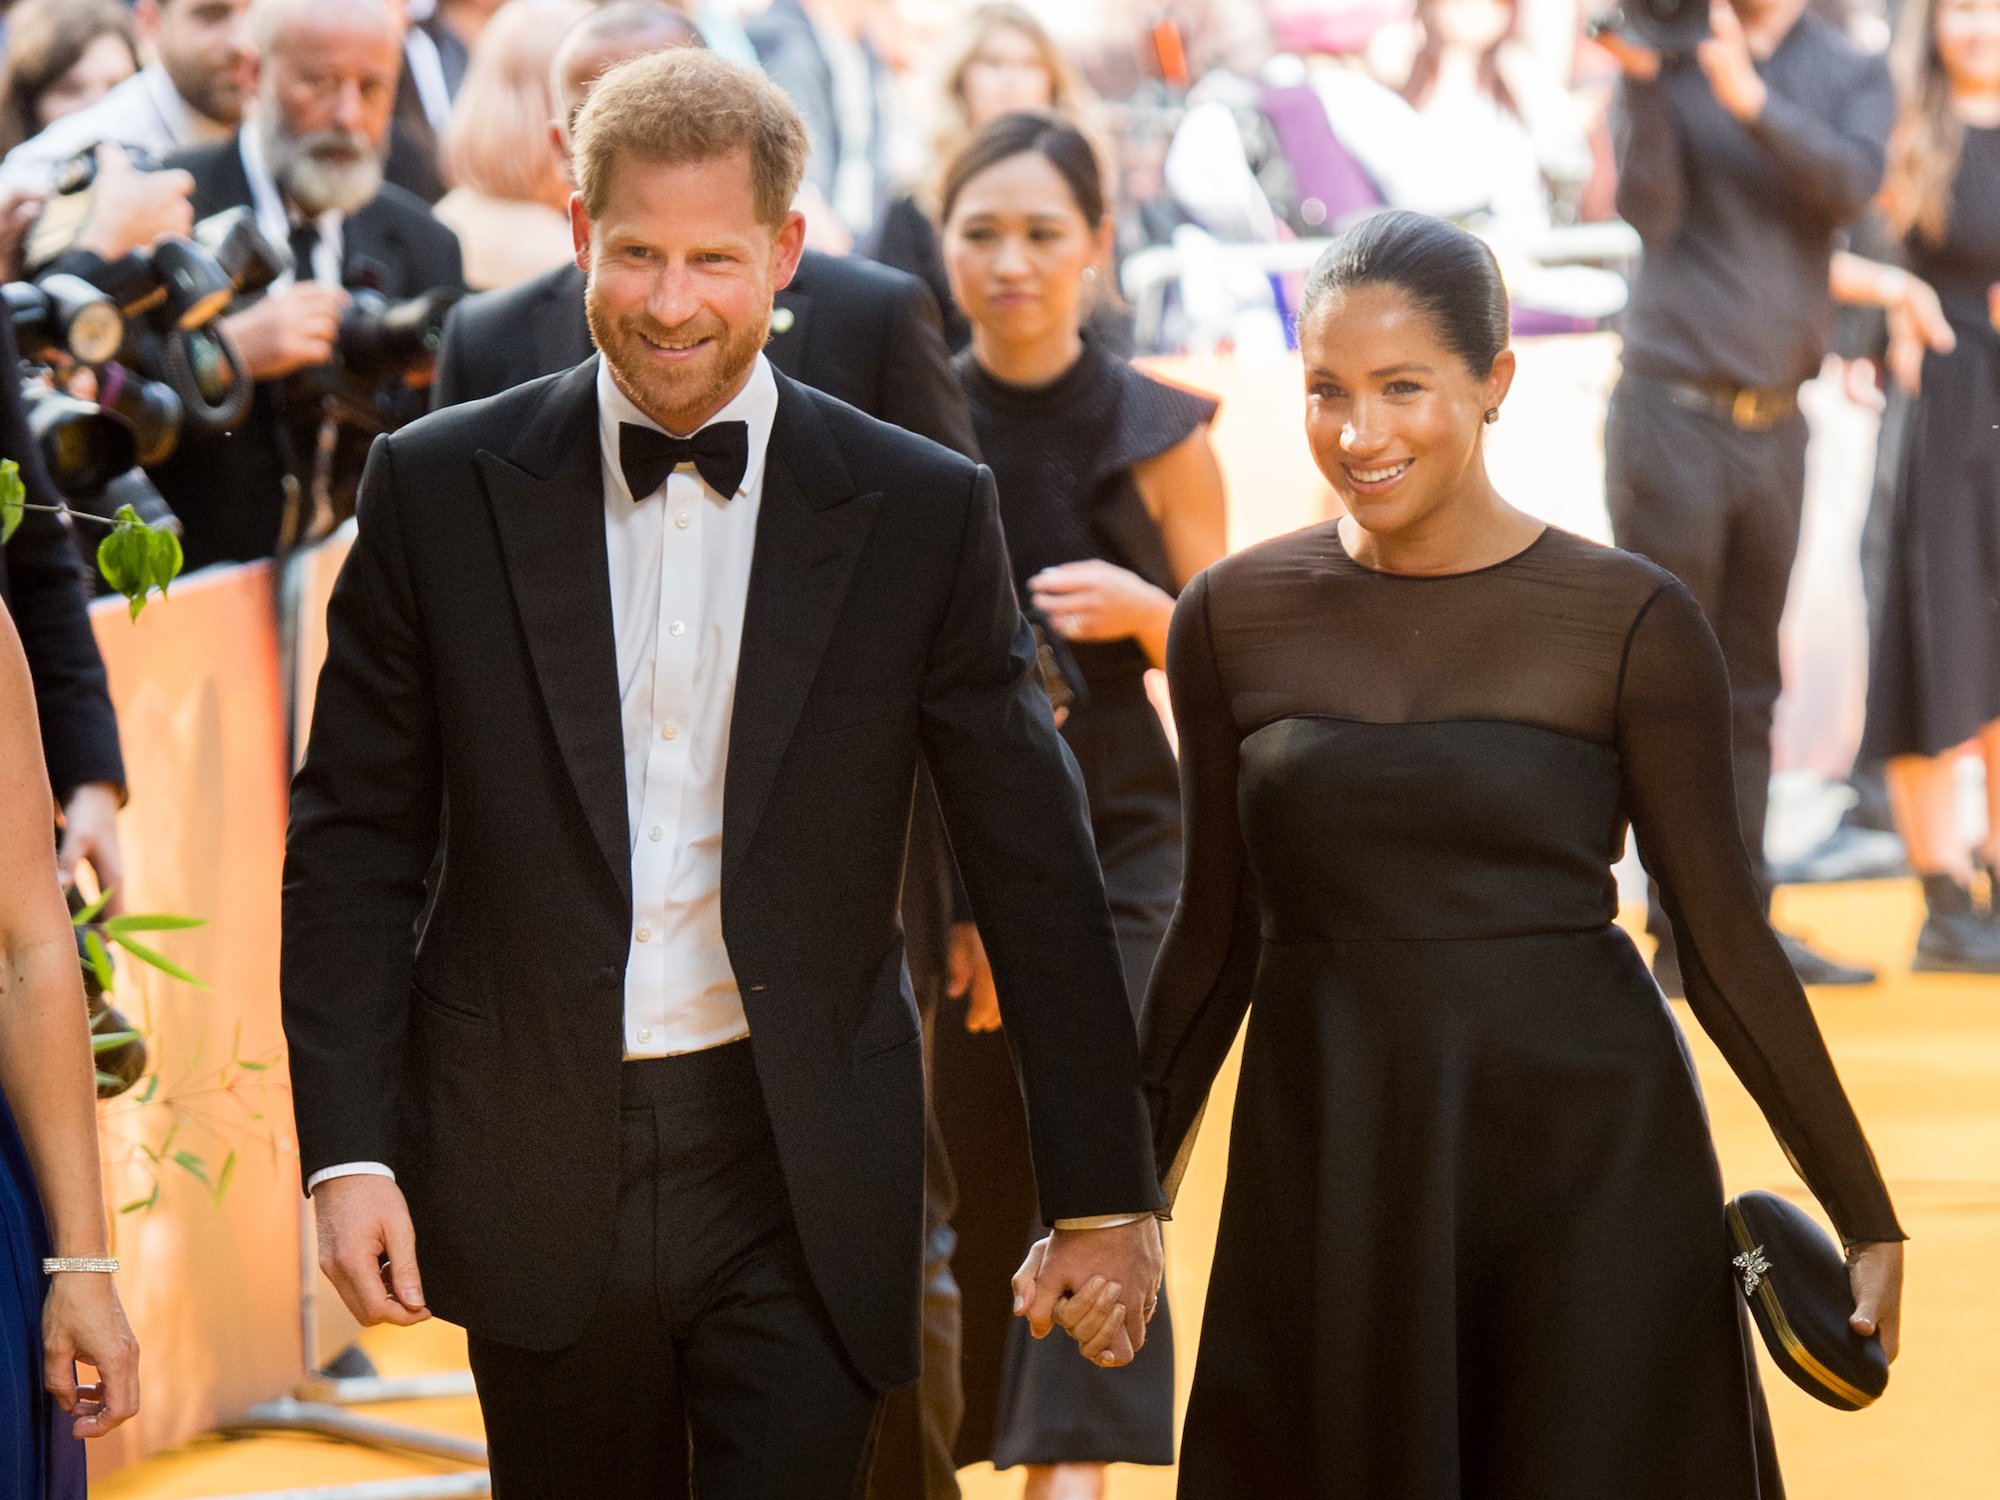 Prince Harry and Meghan Markle smiling, holding hands